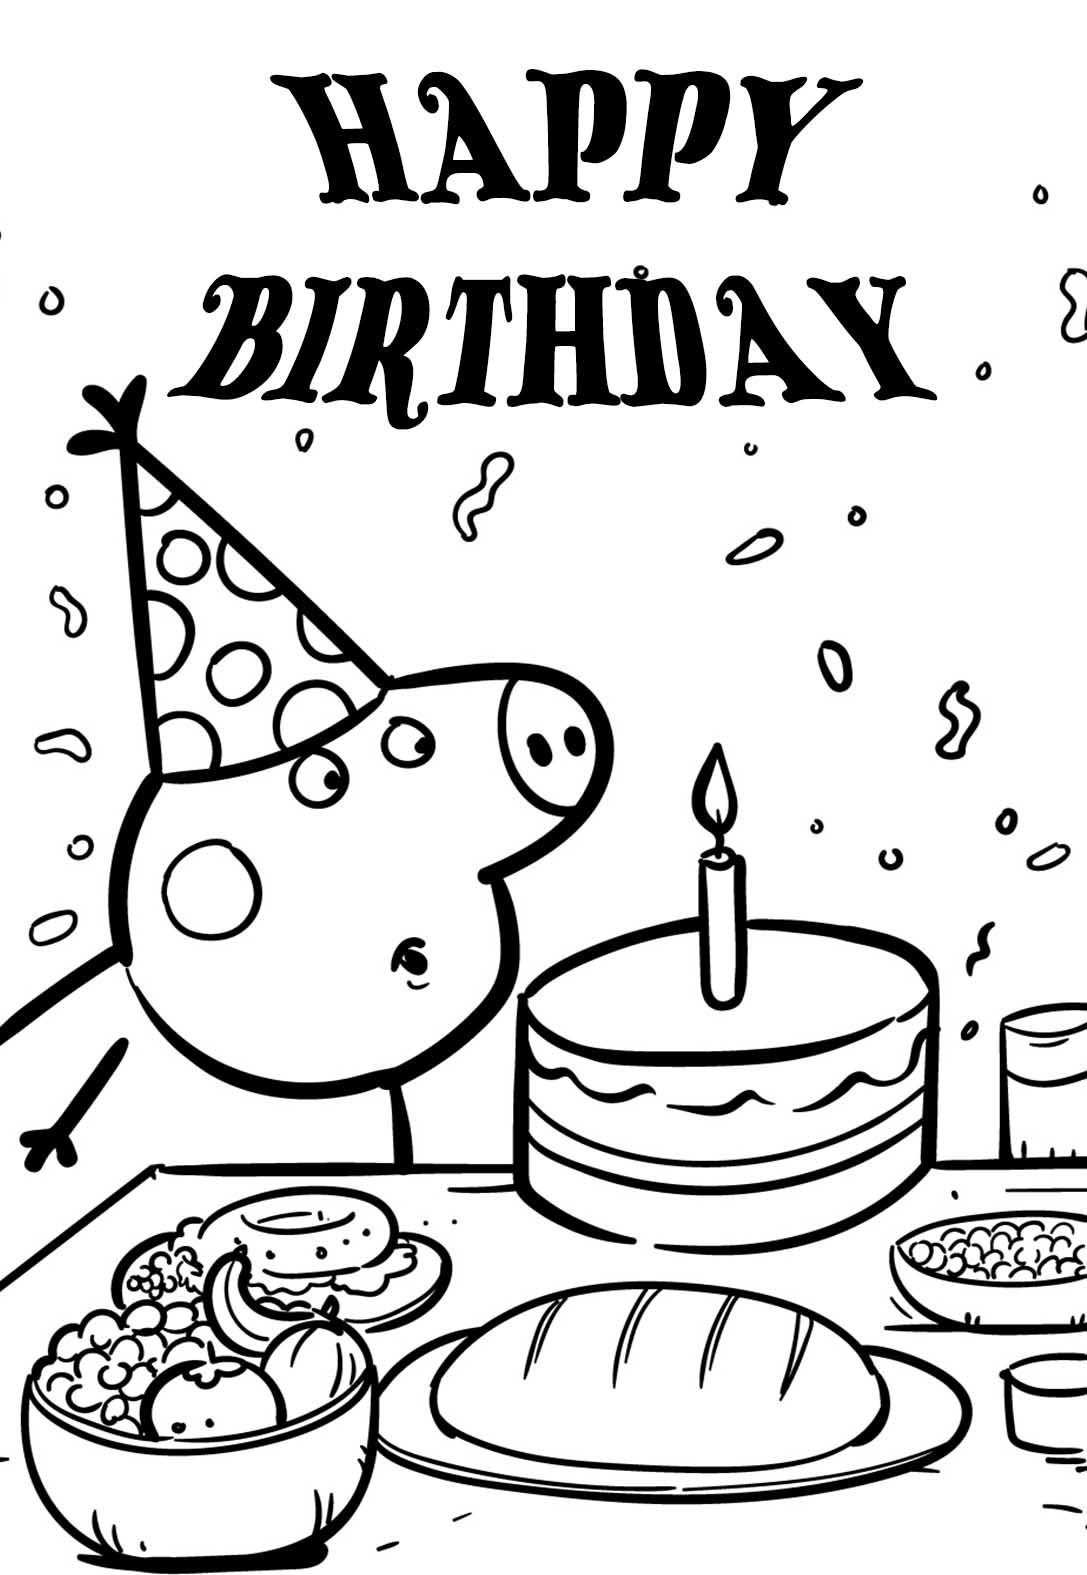 4 Peppa Pig Themed Birthday Coloring Pages & Cards (free ...